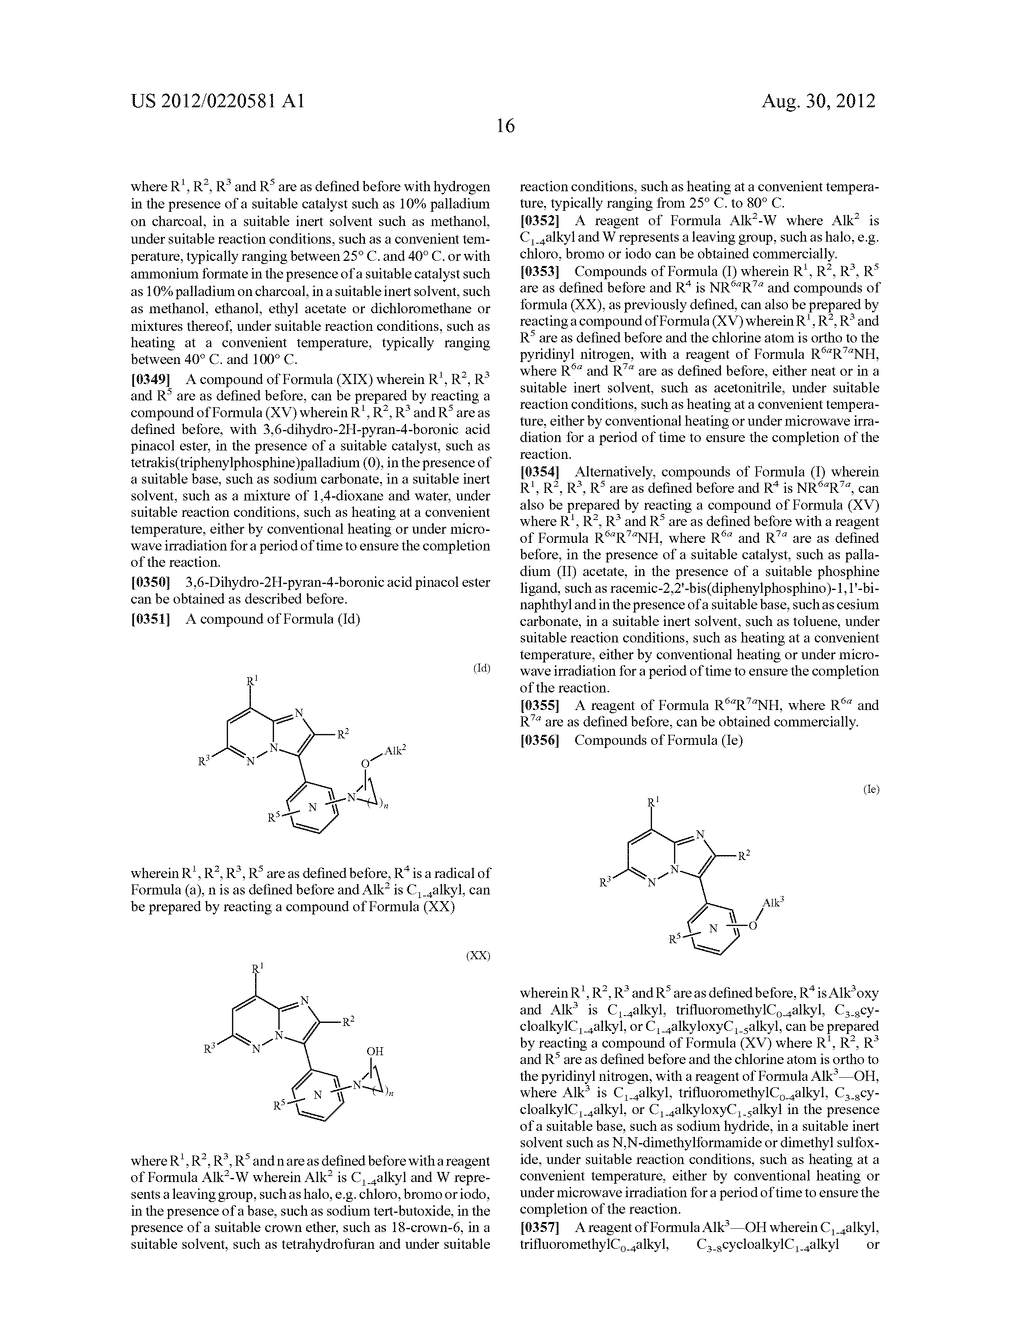 IMIDAZO[1,2-b]PYRIDAZINE DERIVATIVES AND THEIR USE AS PDE10 INHIBITORS - diagram, schematic, and image 17